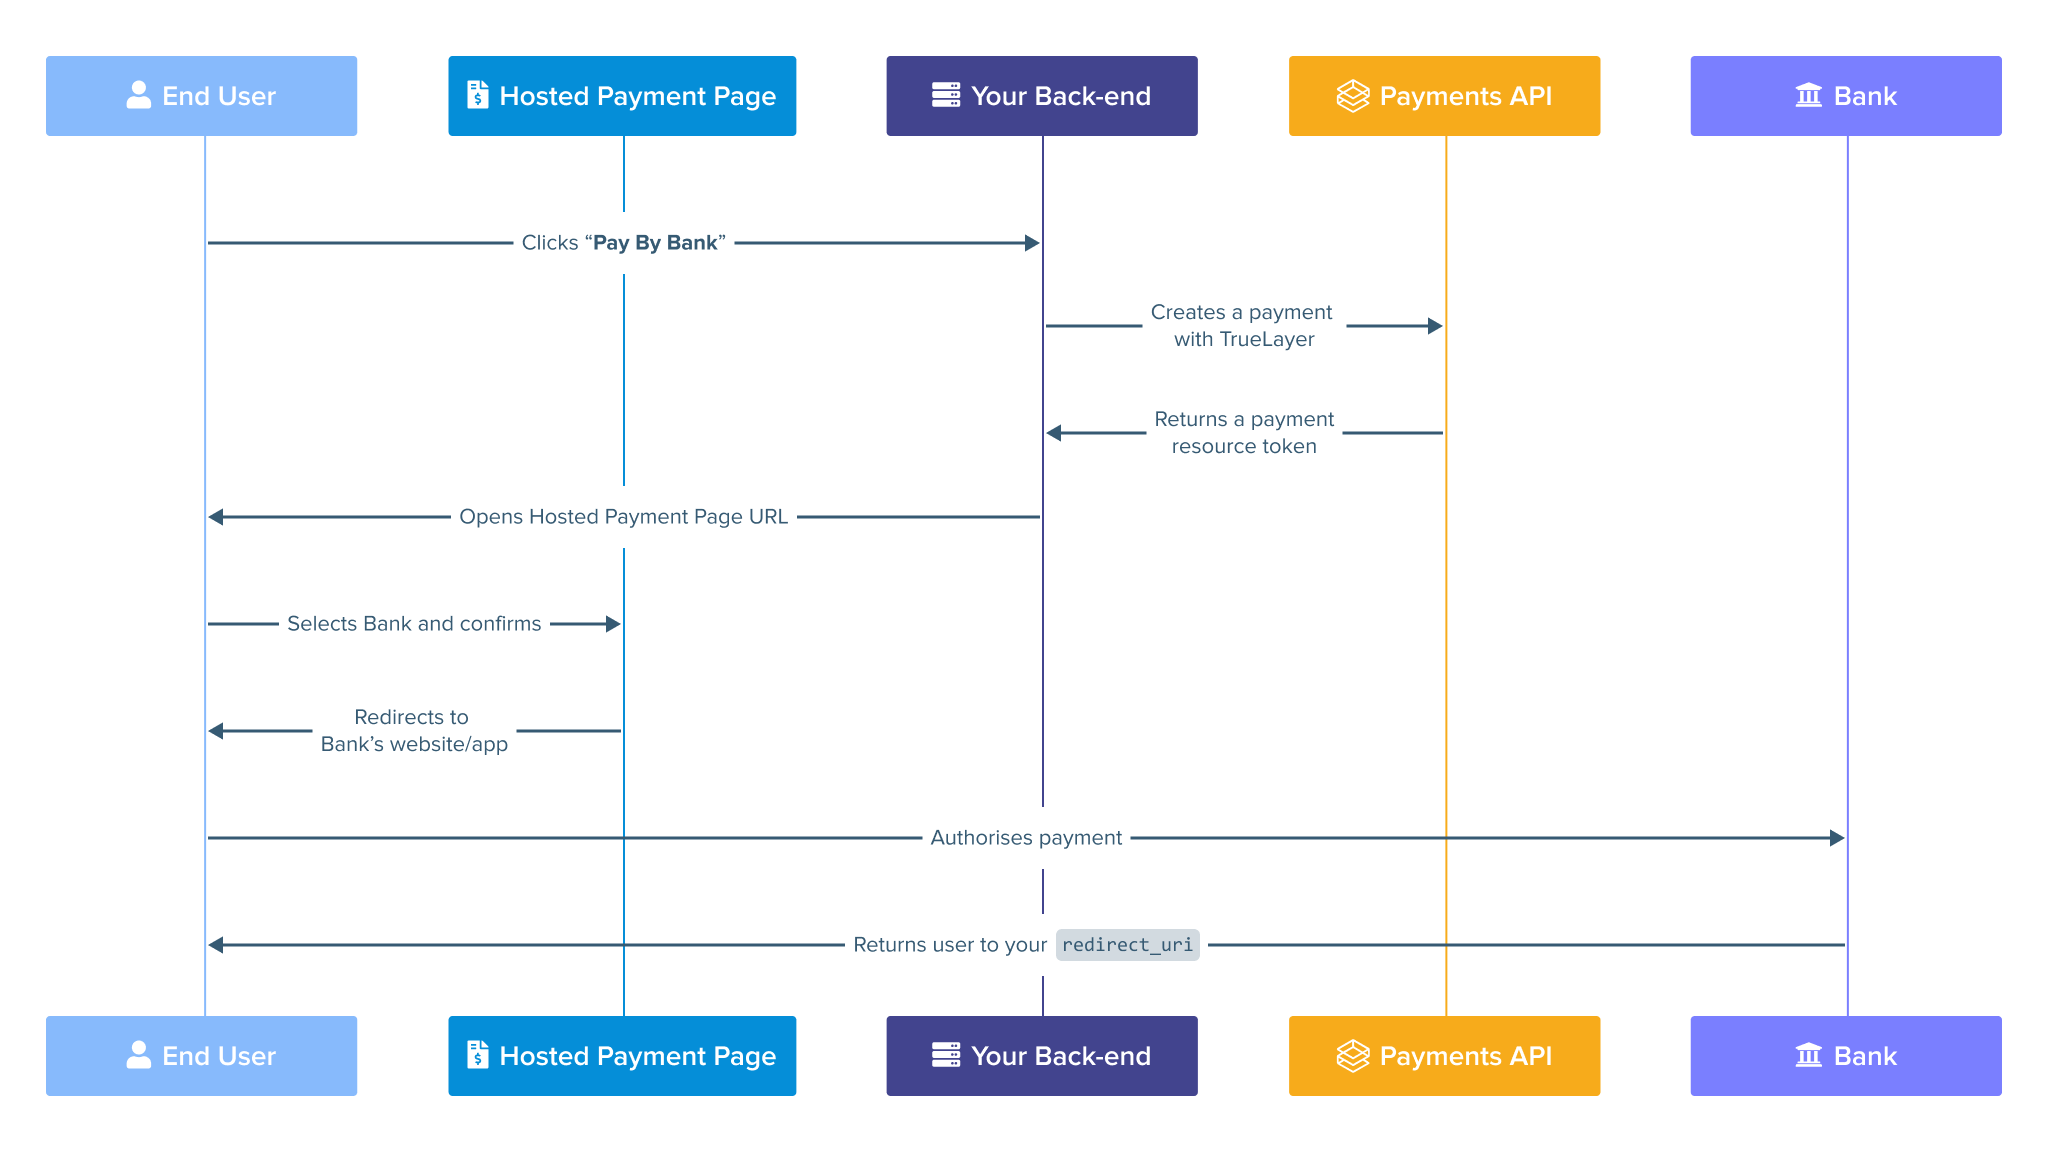 Image containing a diagram that shows the payment journey with HPP integration.